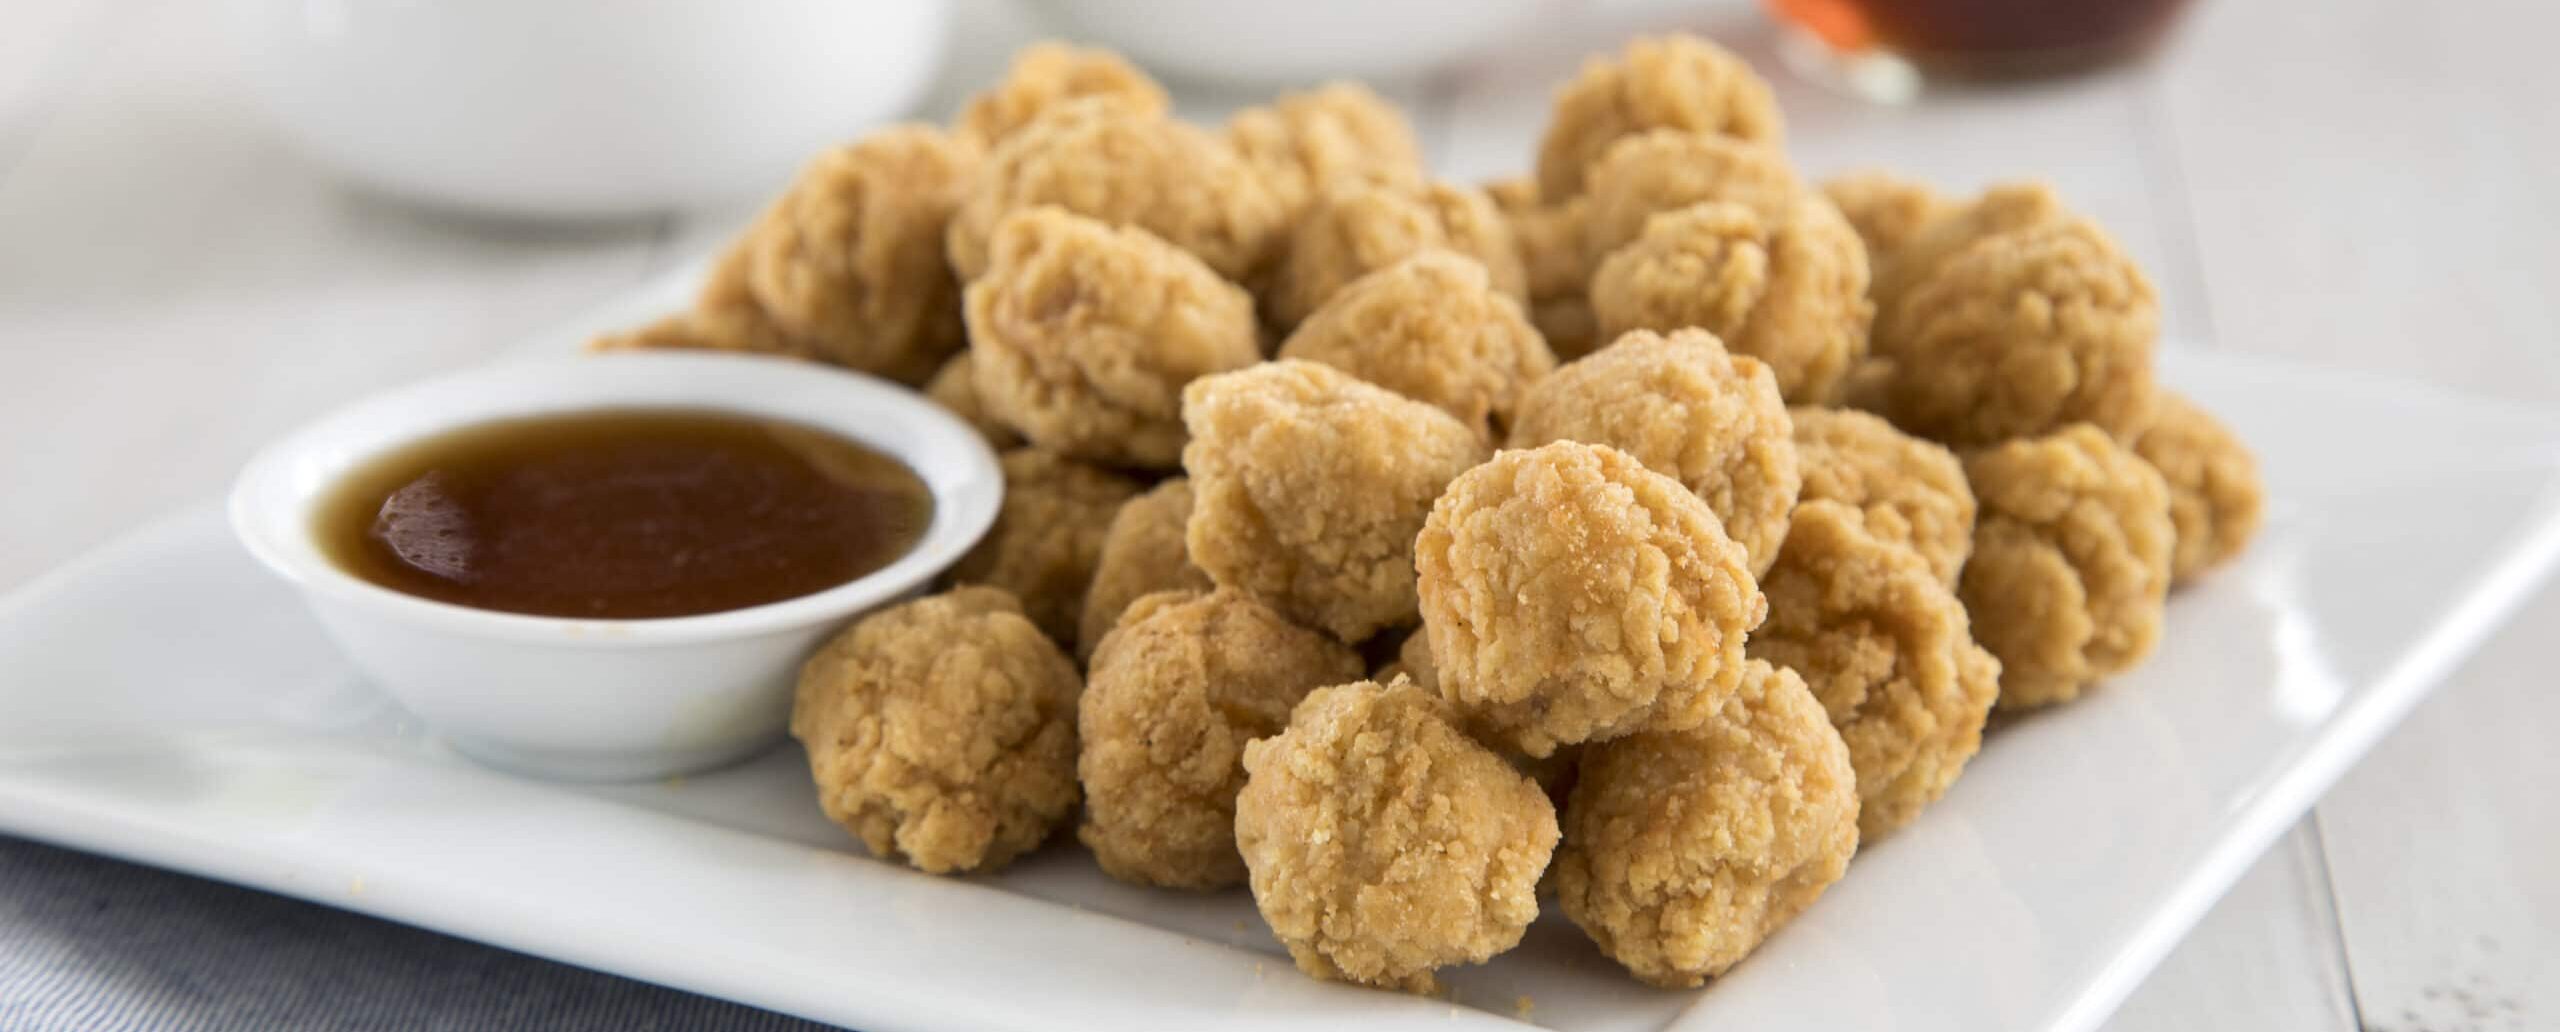 Plate of fried chicken nuggets with a dipping sauce, fruit in the background